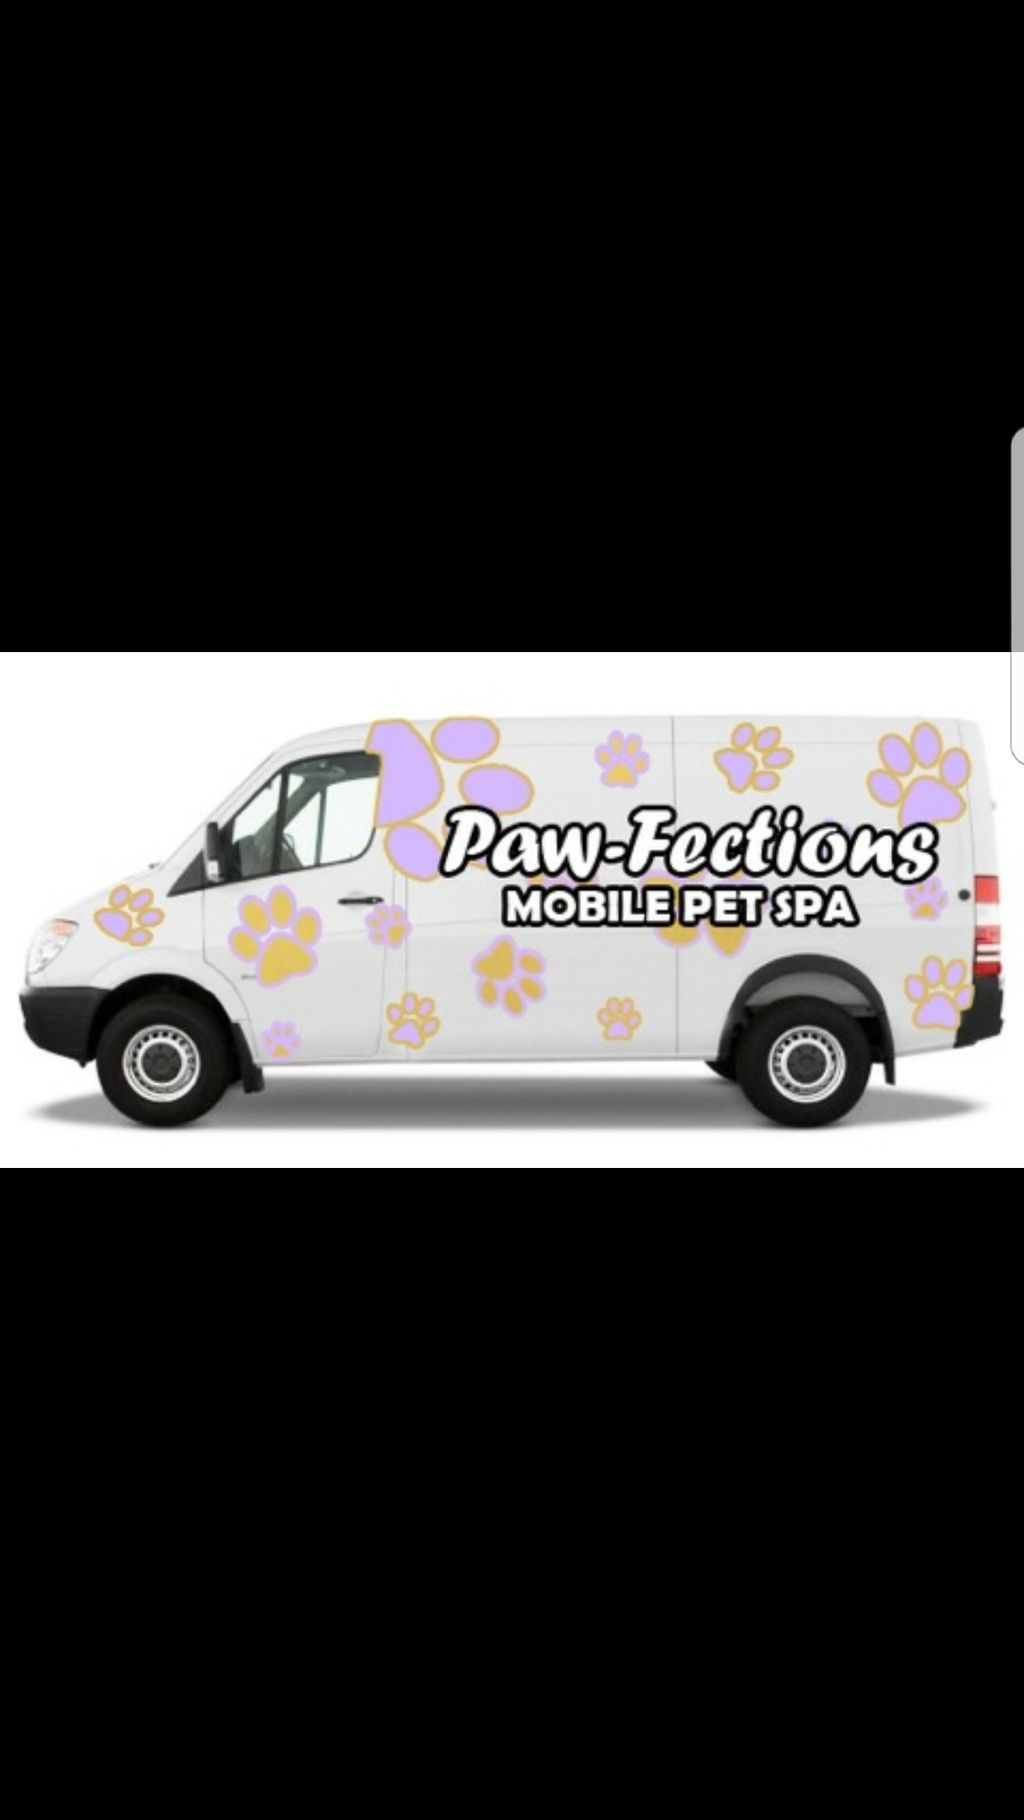 Paw-fections Mobile Pet Spa